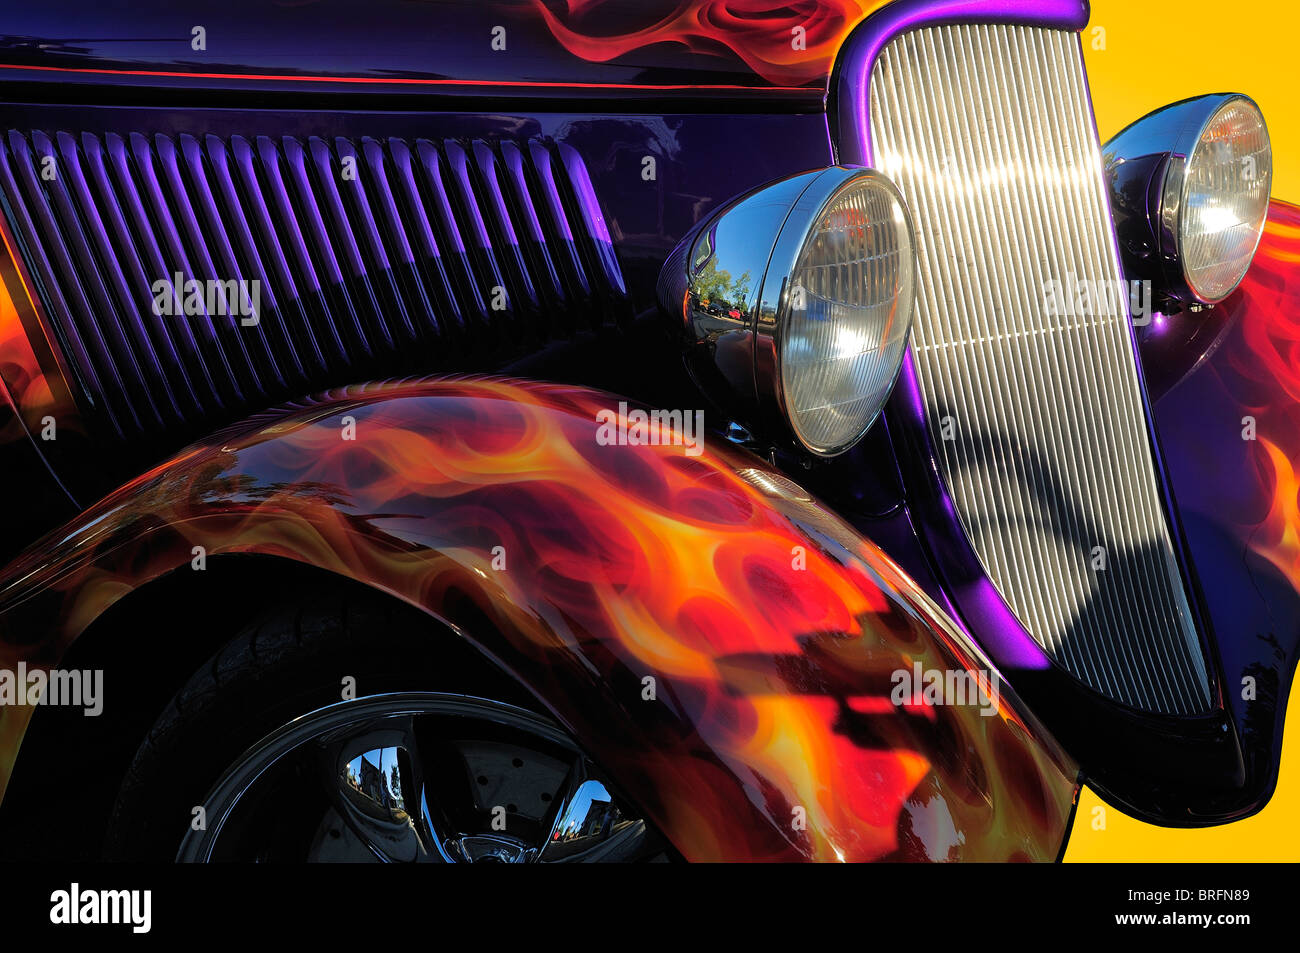 Abstract view of American Hot Rod custom flame de peinture.. Banque D'Images